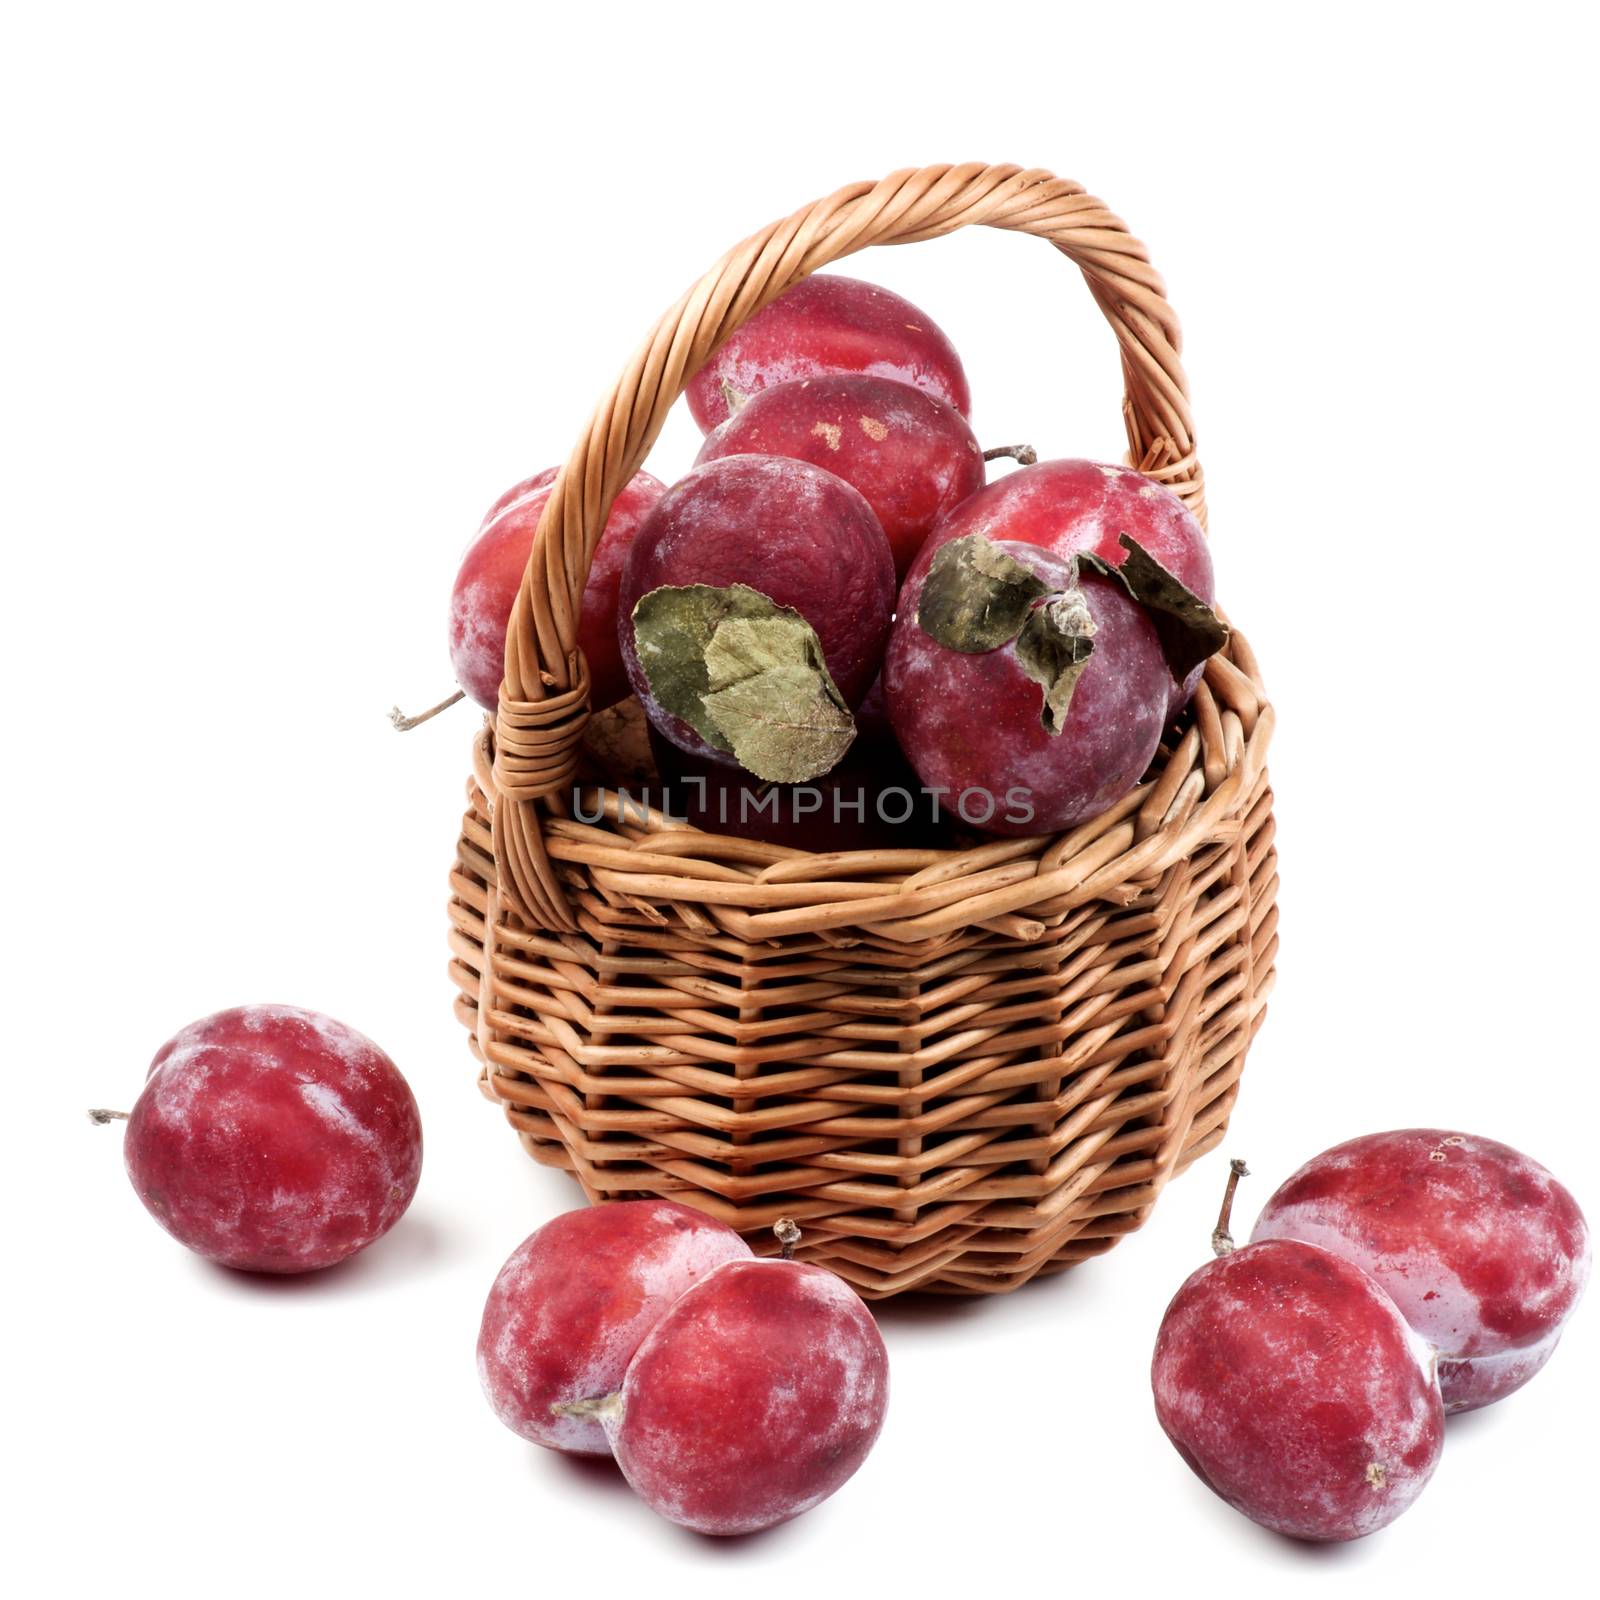 Arrangement of Frozen Sweet Red Plums with Leafs in Wicker Basket isolated on White background